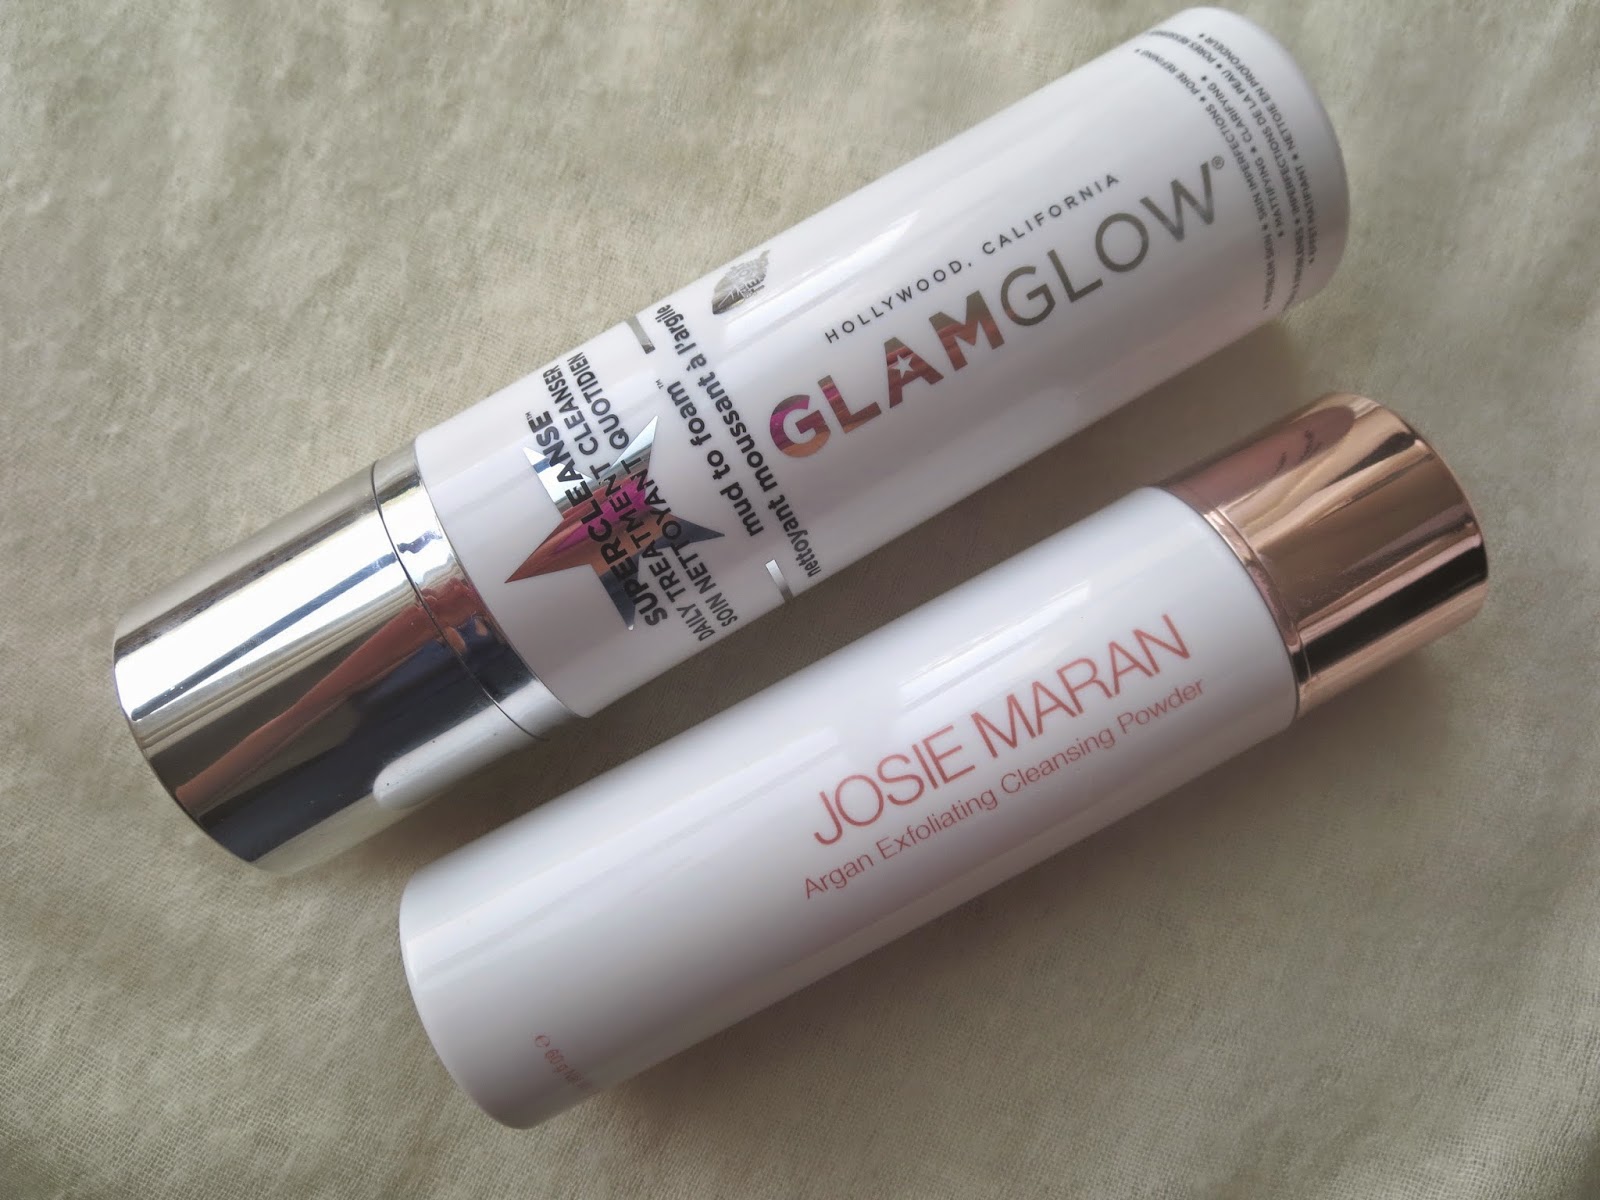 a picture of glamglow supercleanse daily clearing cleanser & josie maran argan exfoliating cleansing powder